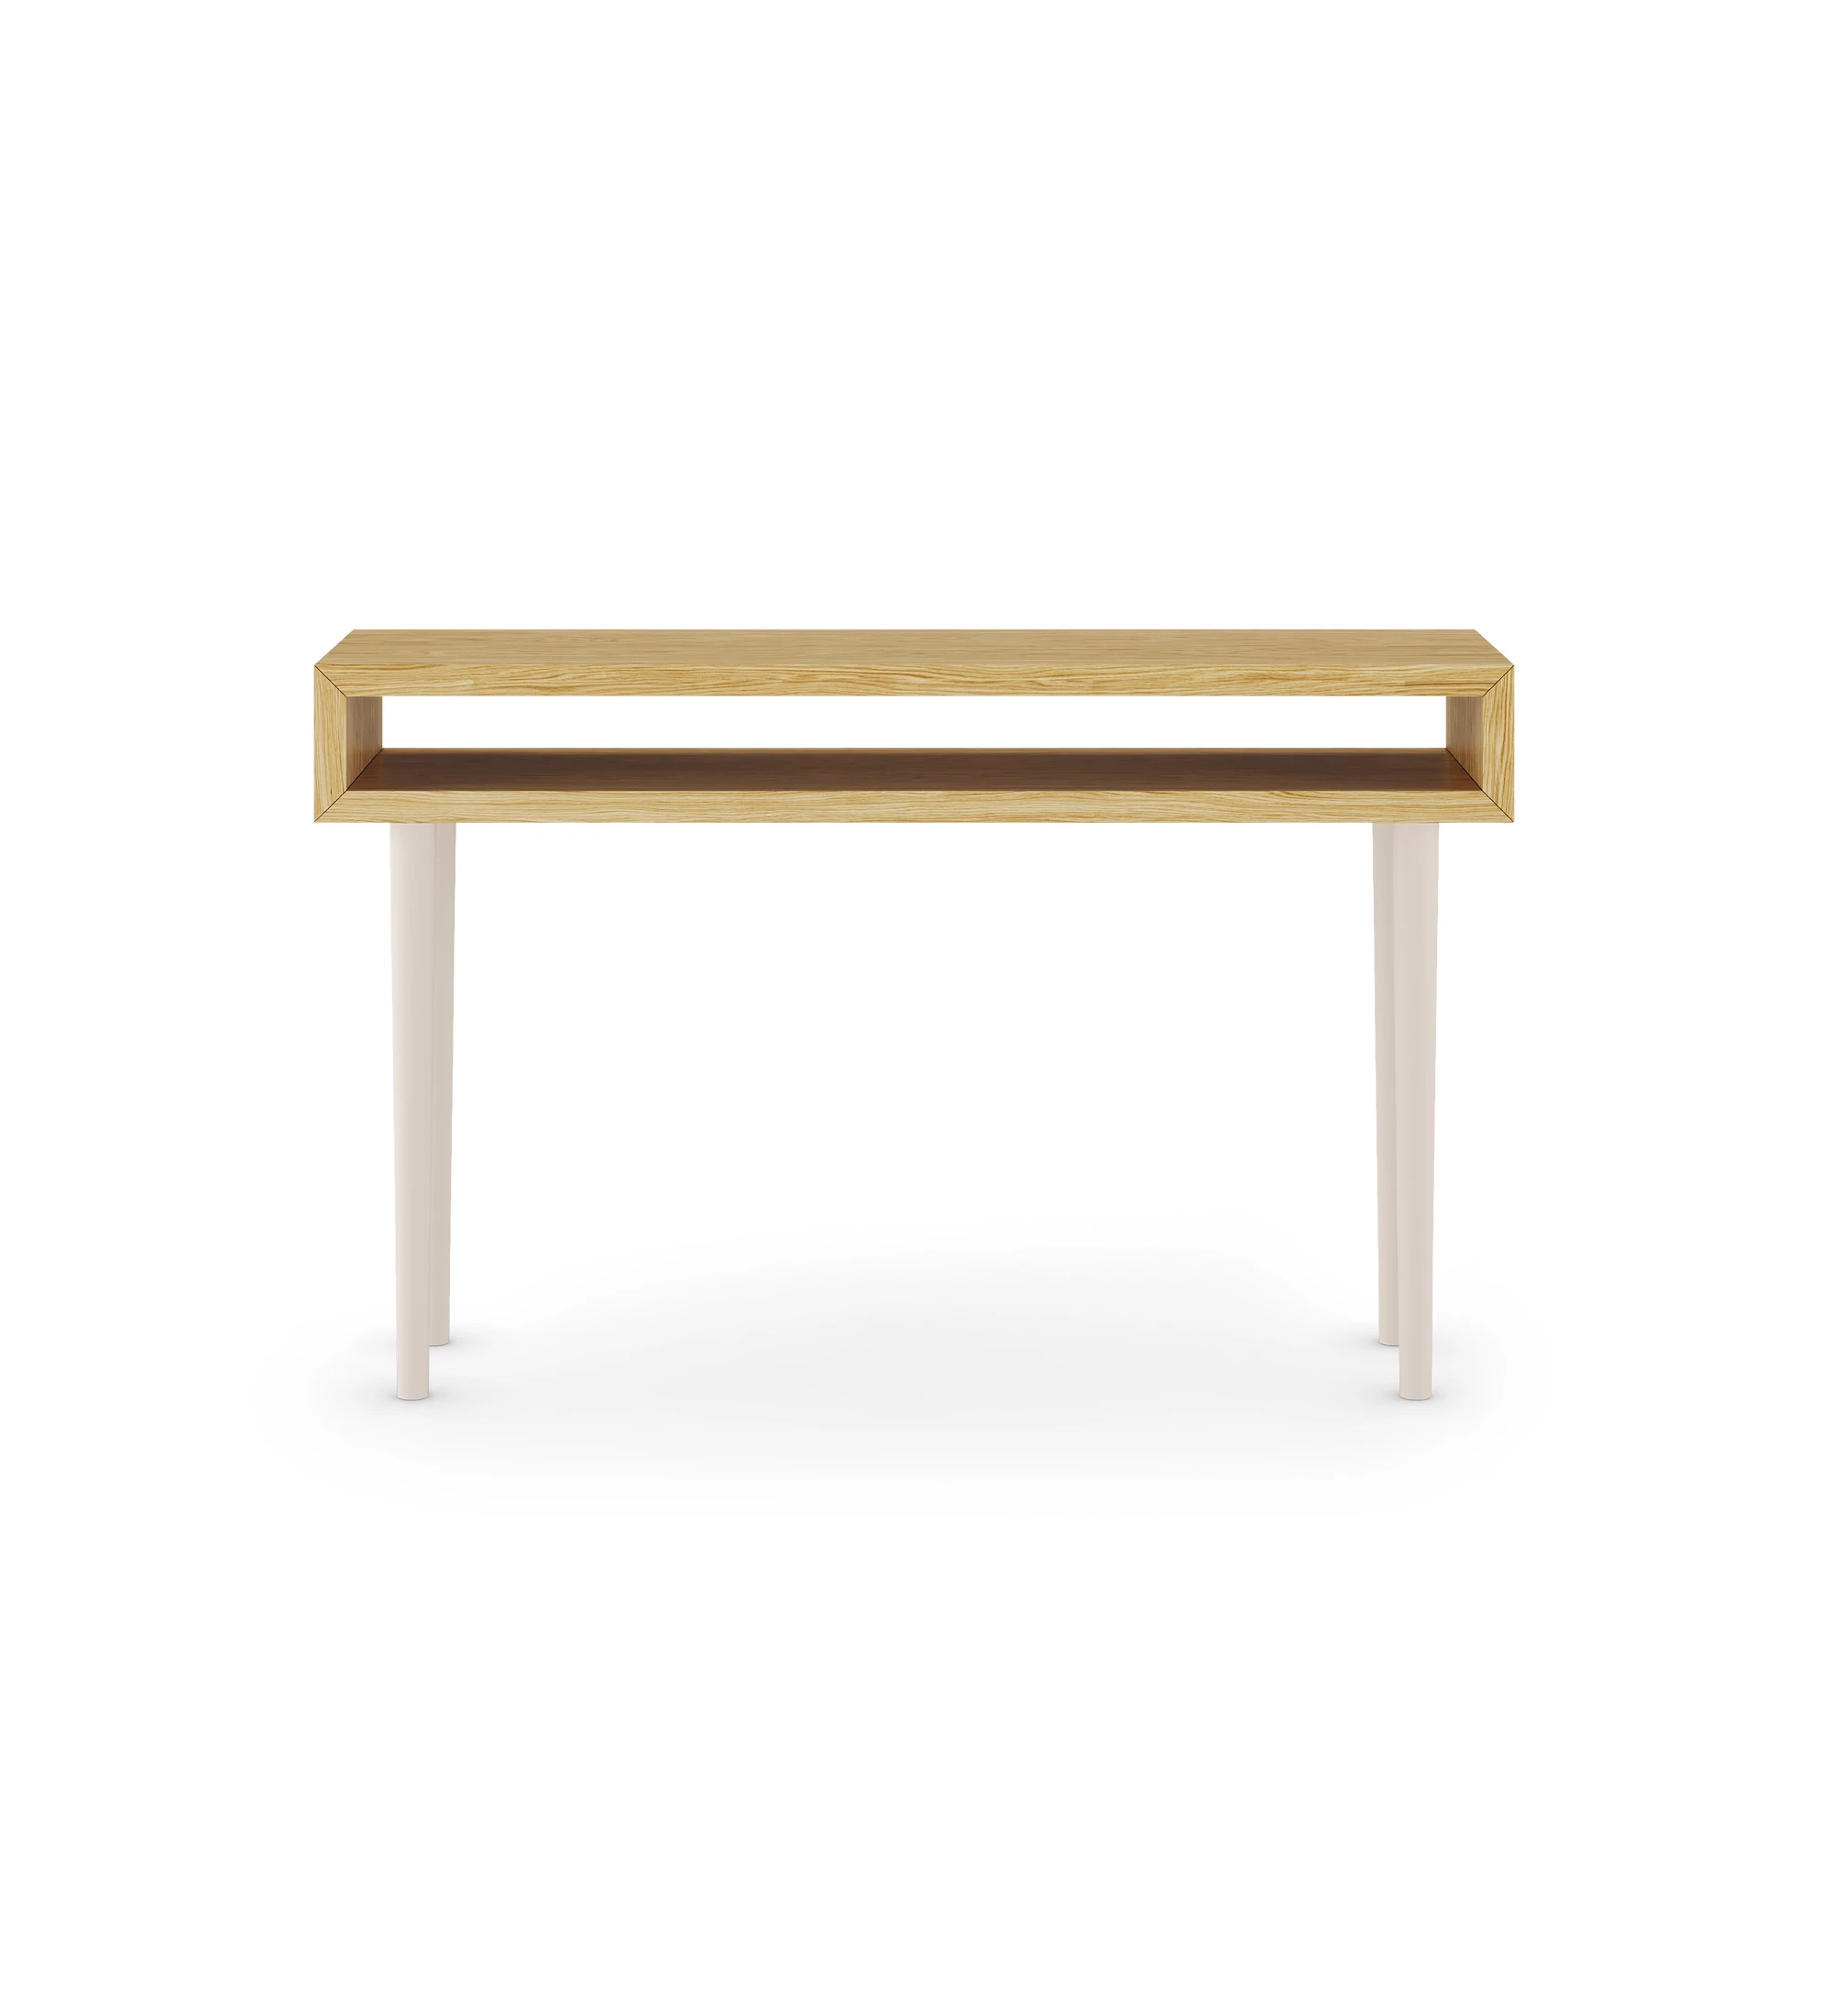 Module in natural oak and pearl lacquered legs